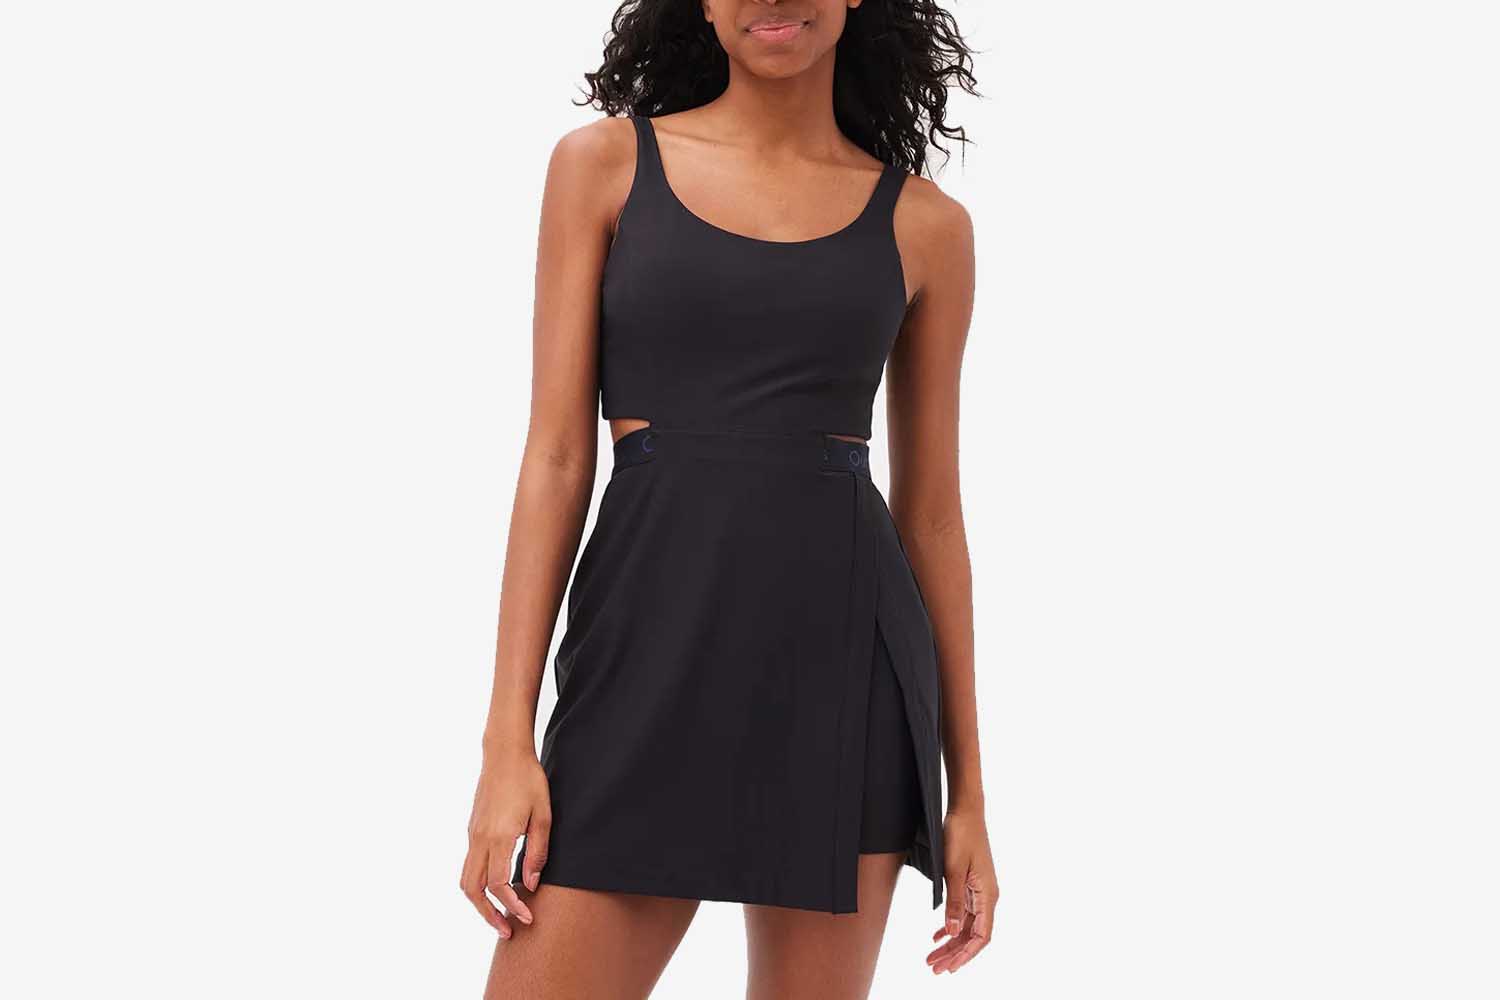 7 Best Exercise Dresses to Gift Any Woman - InsideHook